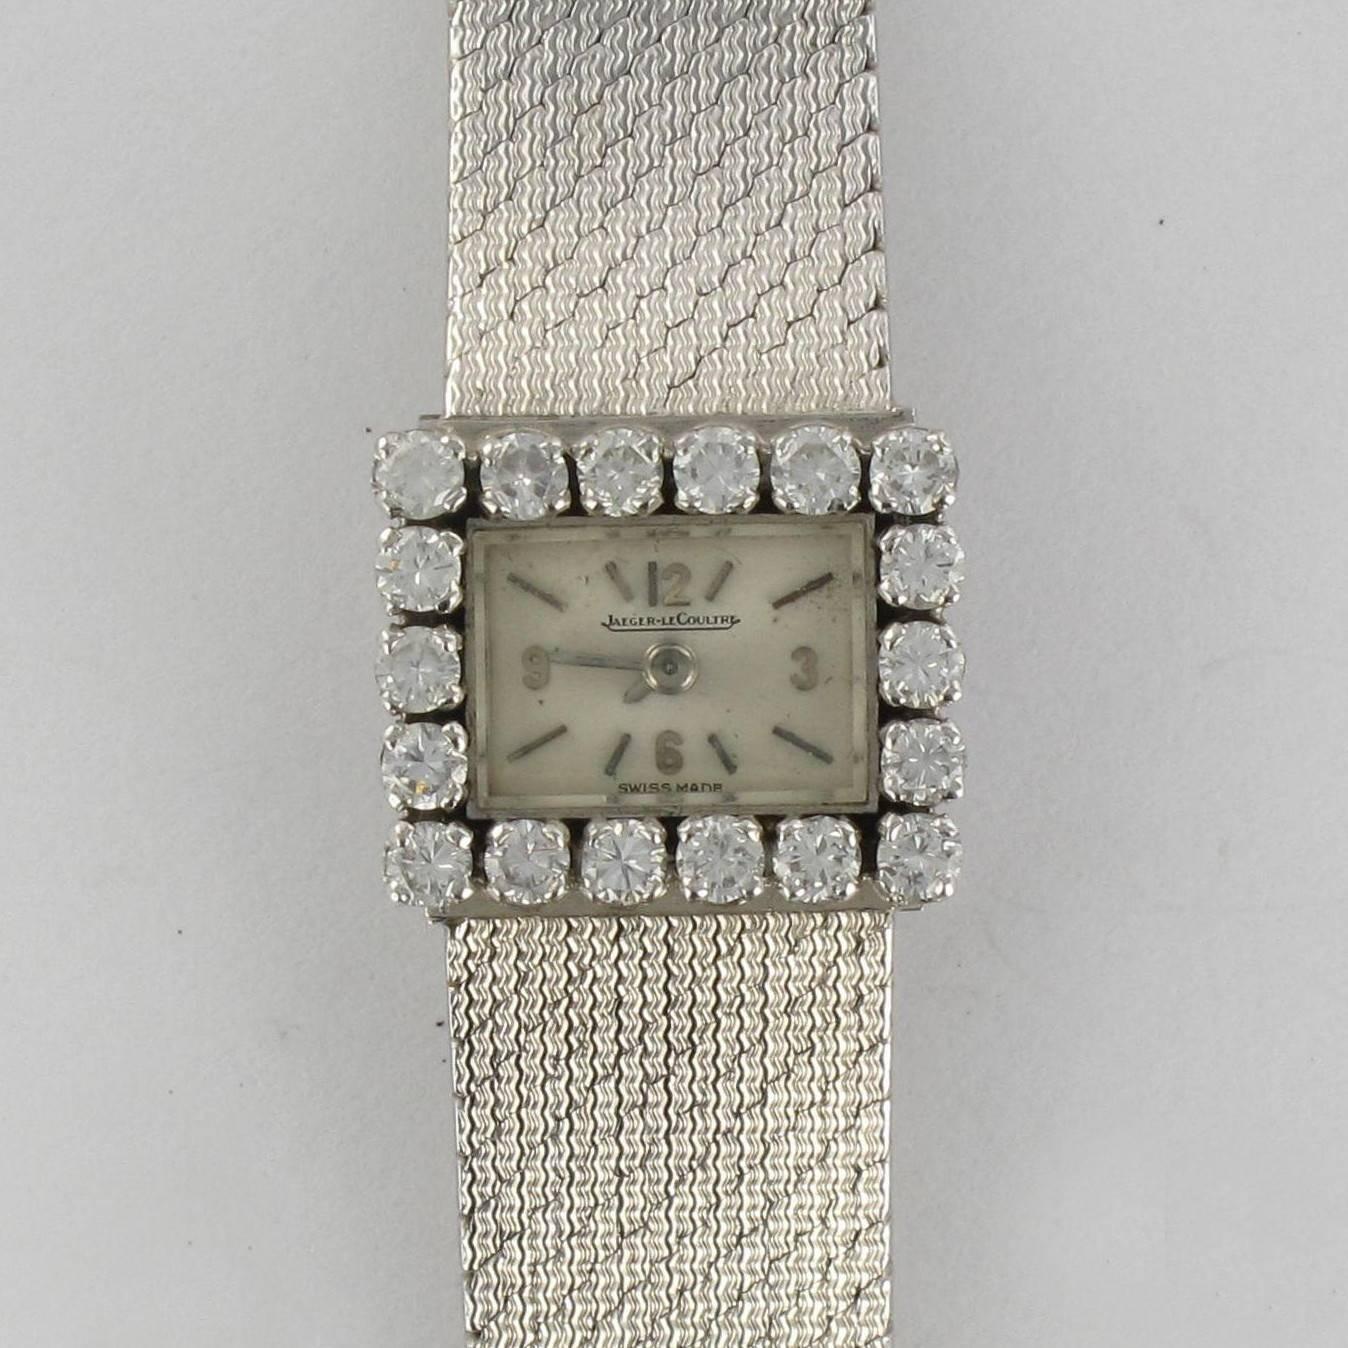 Ladies watch Jaeger- LeCoultre.

Rectangular 18 carat white gold case, eagle head hallmark.
Set with 18 brilliant-cut diamonds - total weight : 0,50 carat approximately

Revised and controlled watch - Very good condition and general